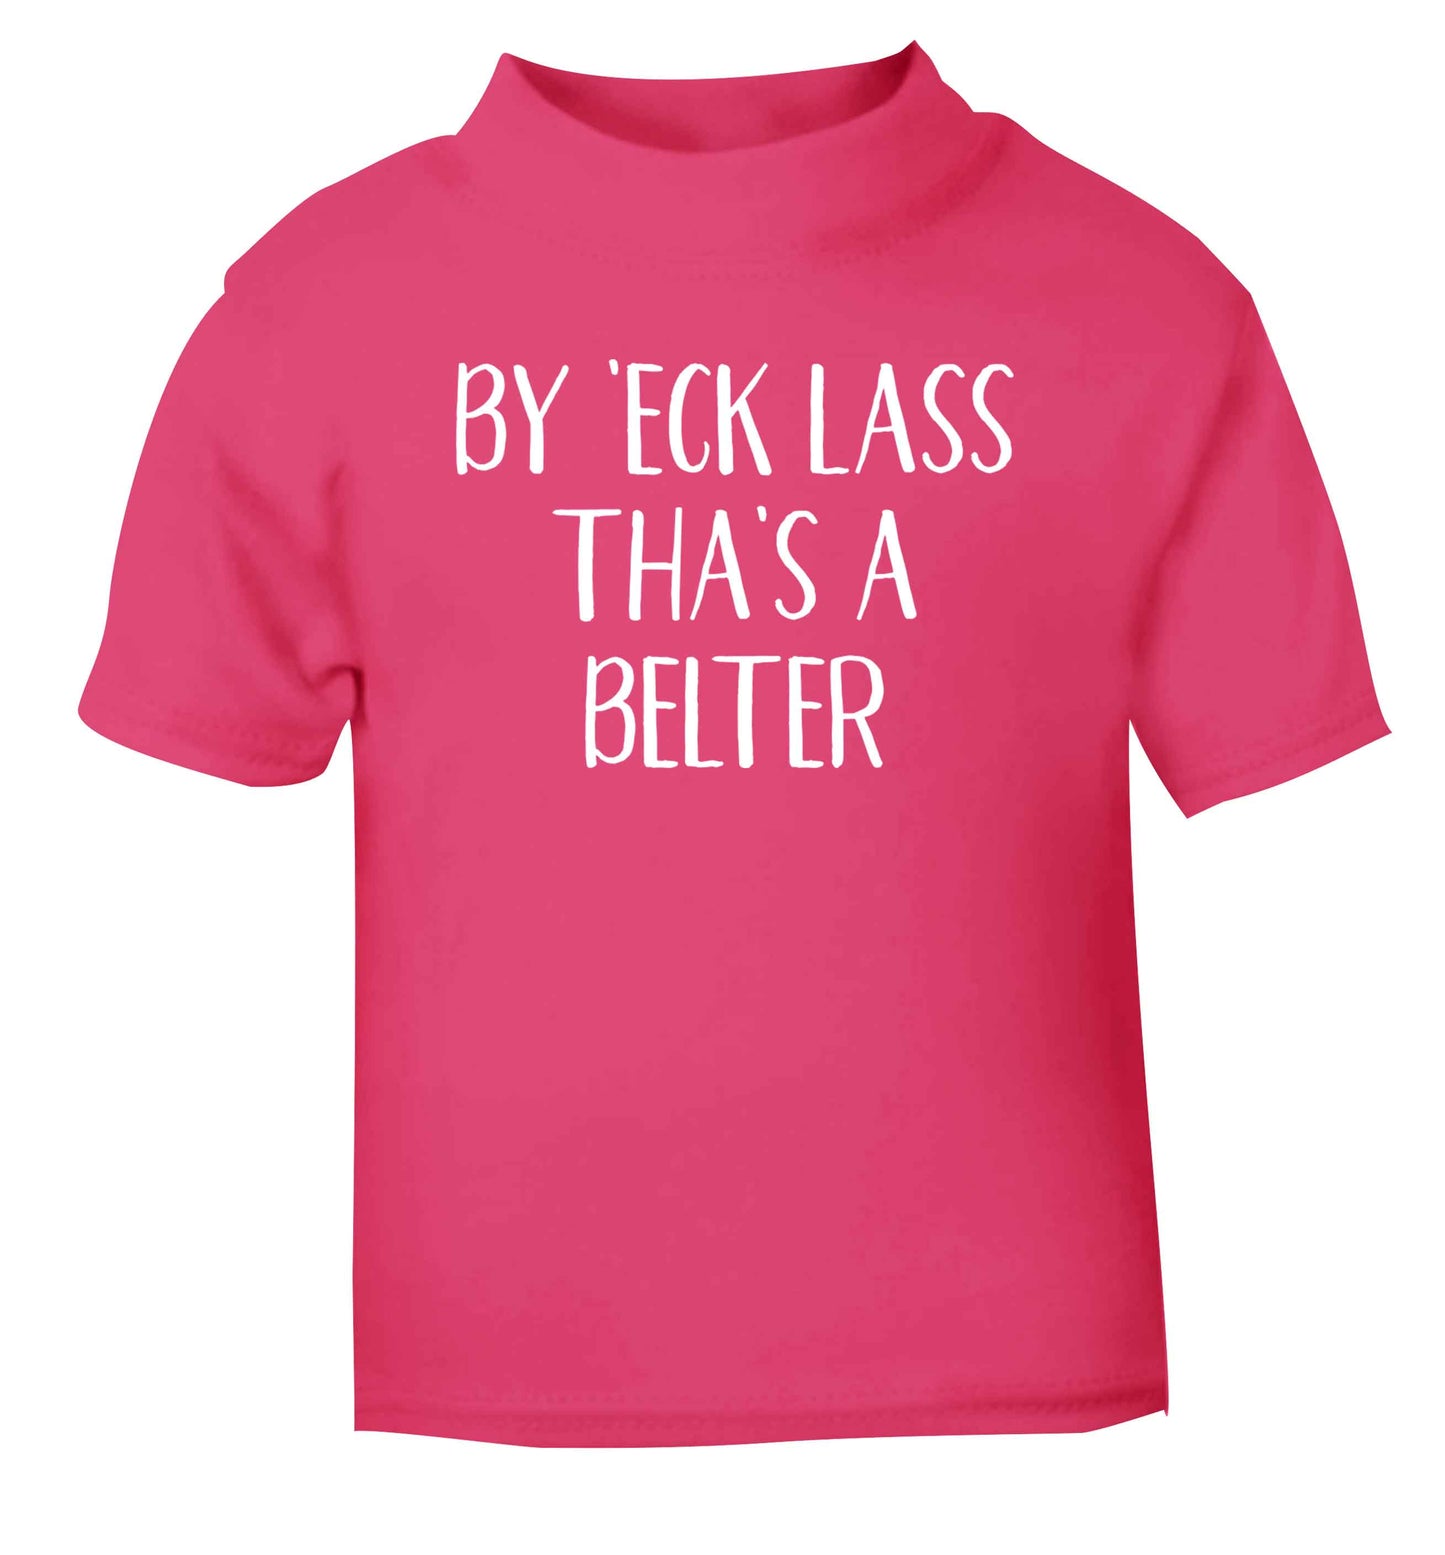 Be 'eck lass tha's a belter pink Baby Toddler Tshirt 2 Years